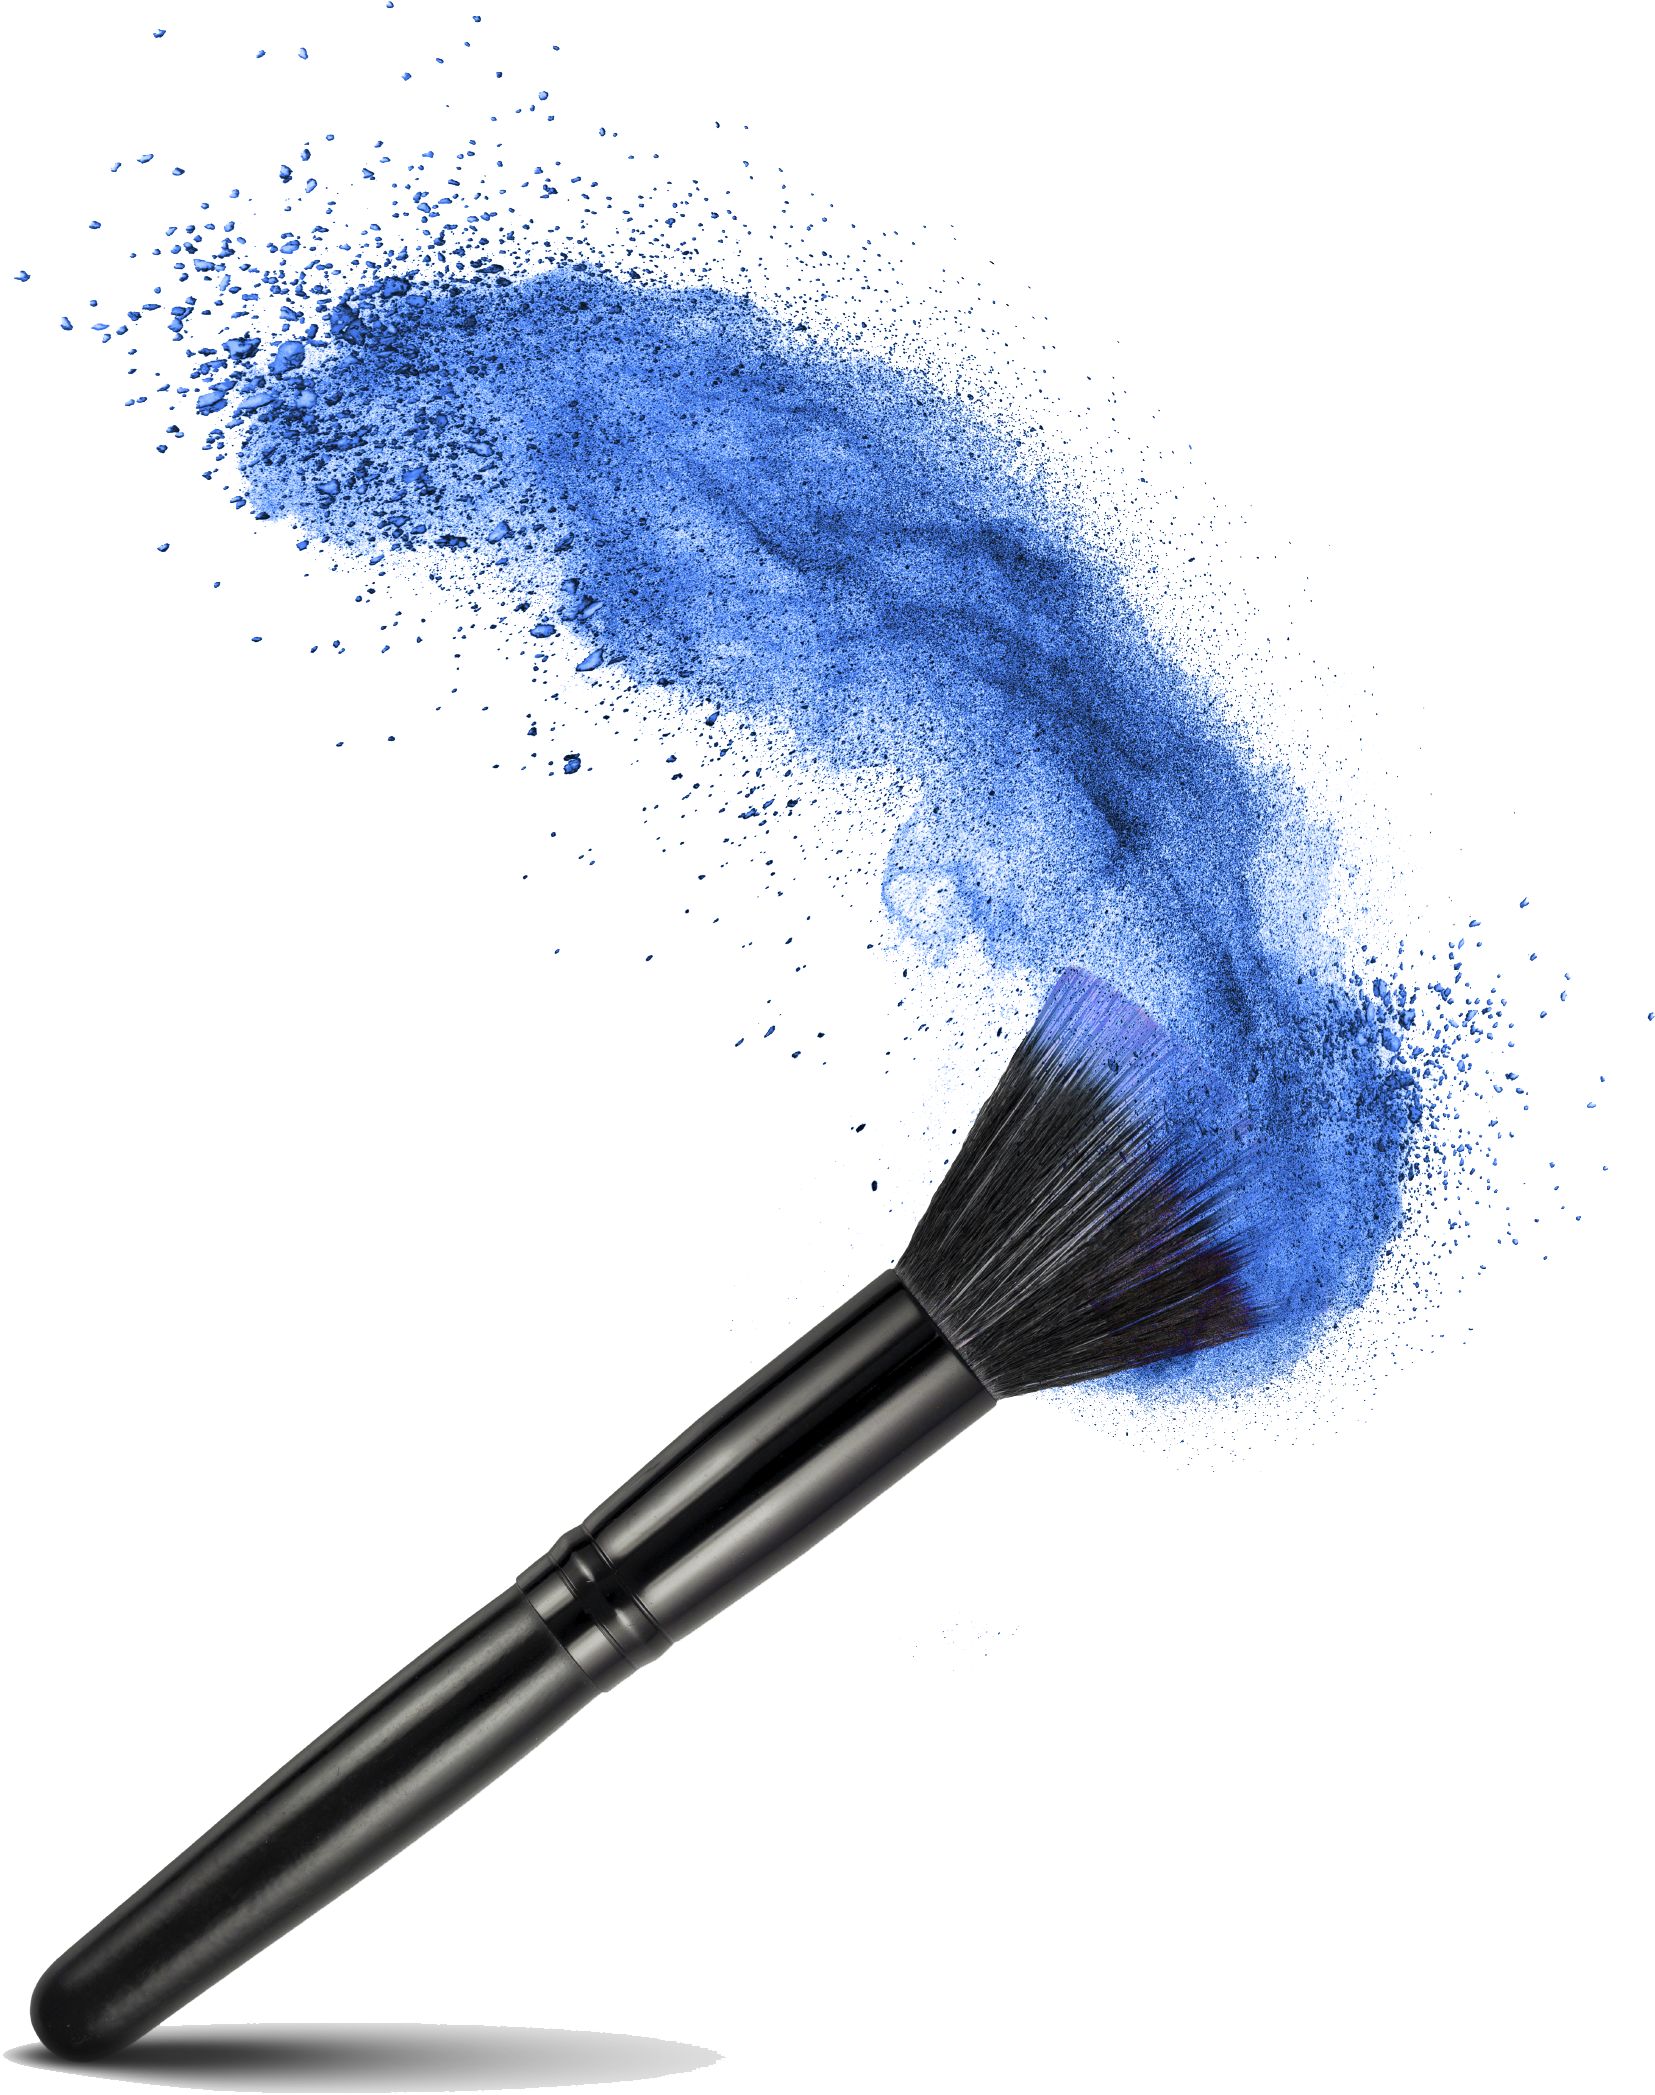 A Brush With Powder Exploding Out Of It